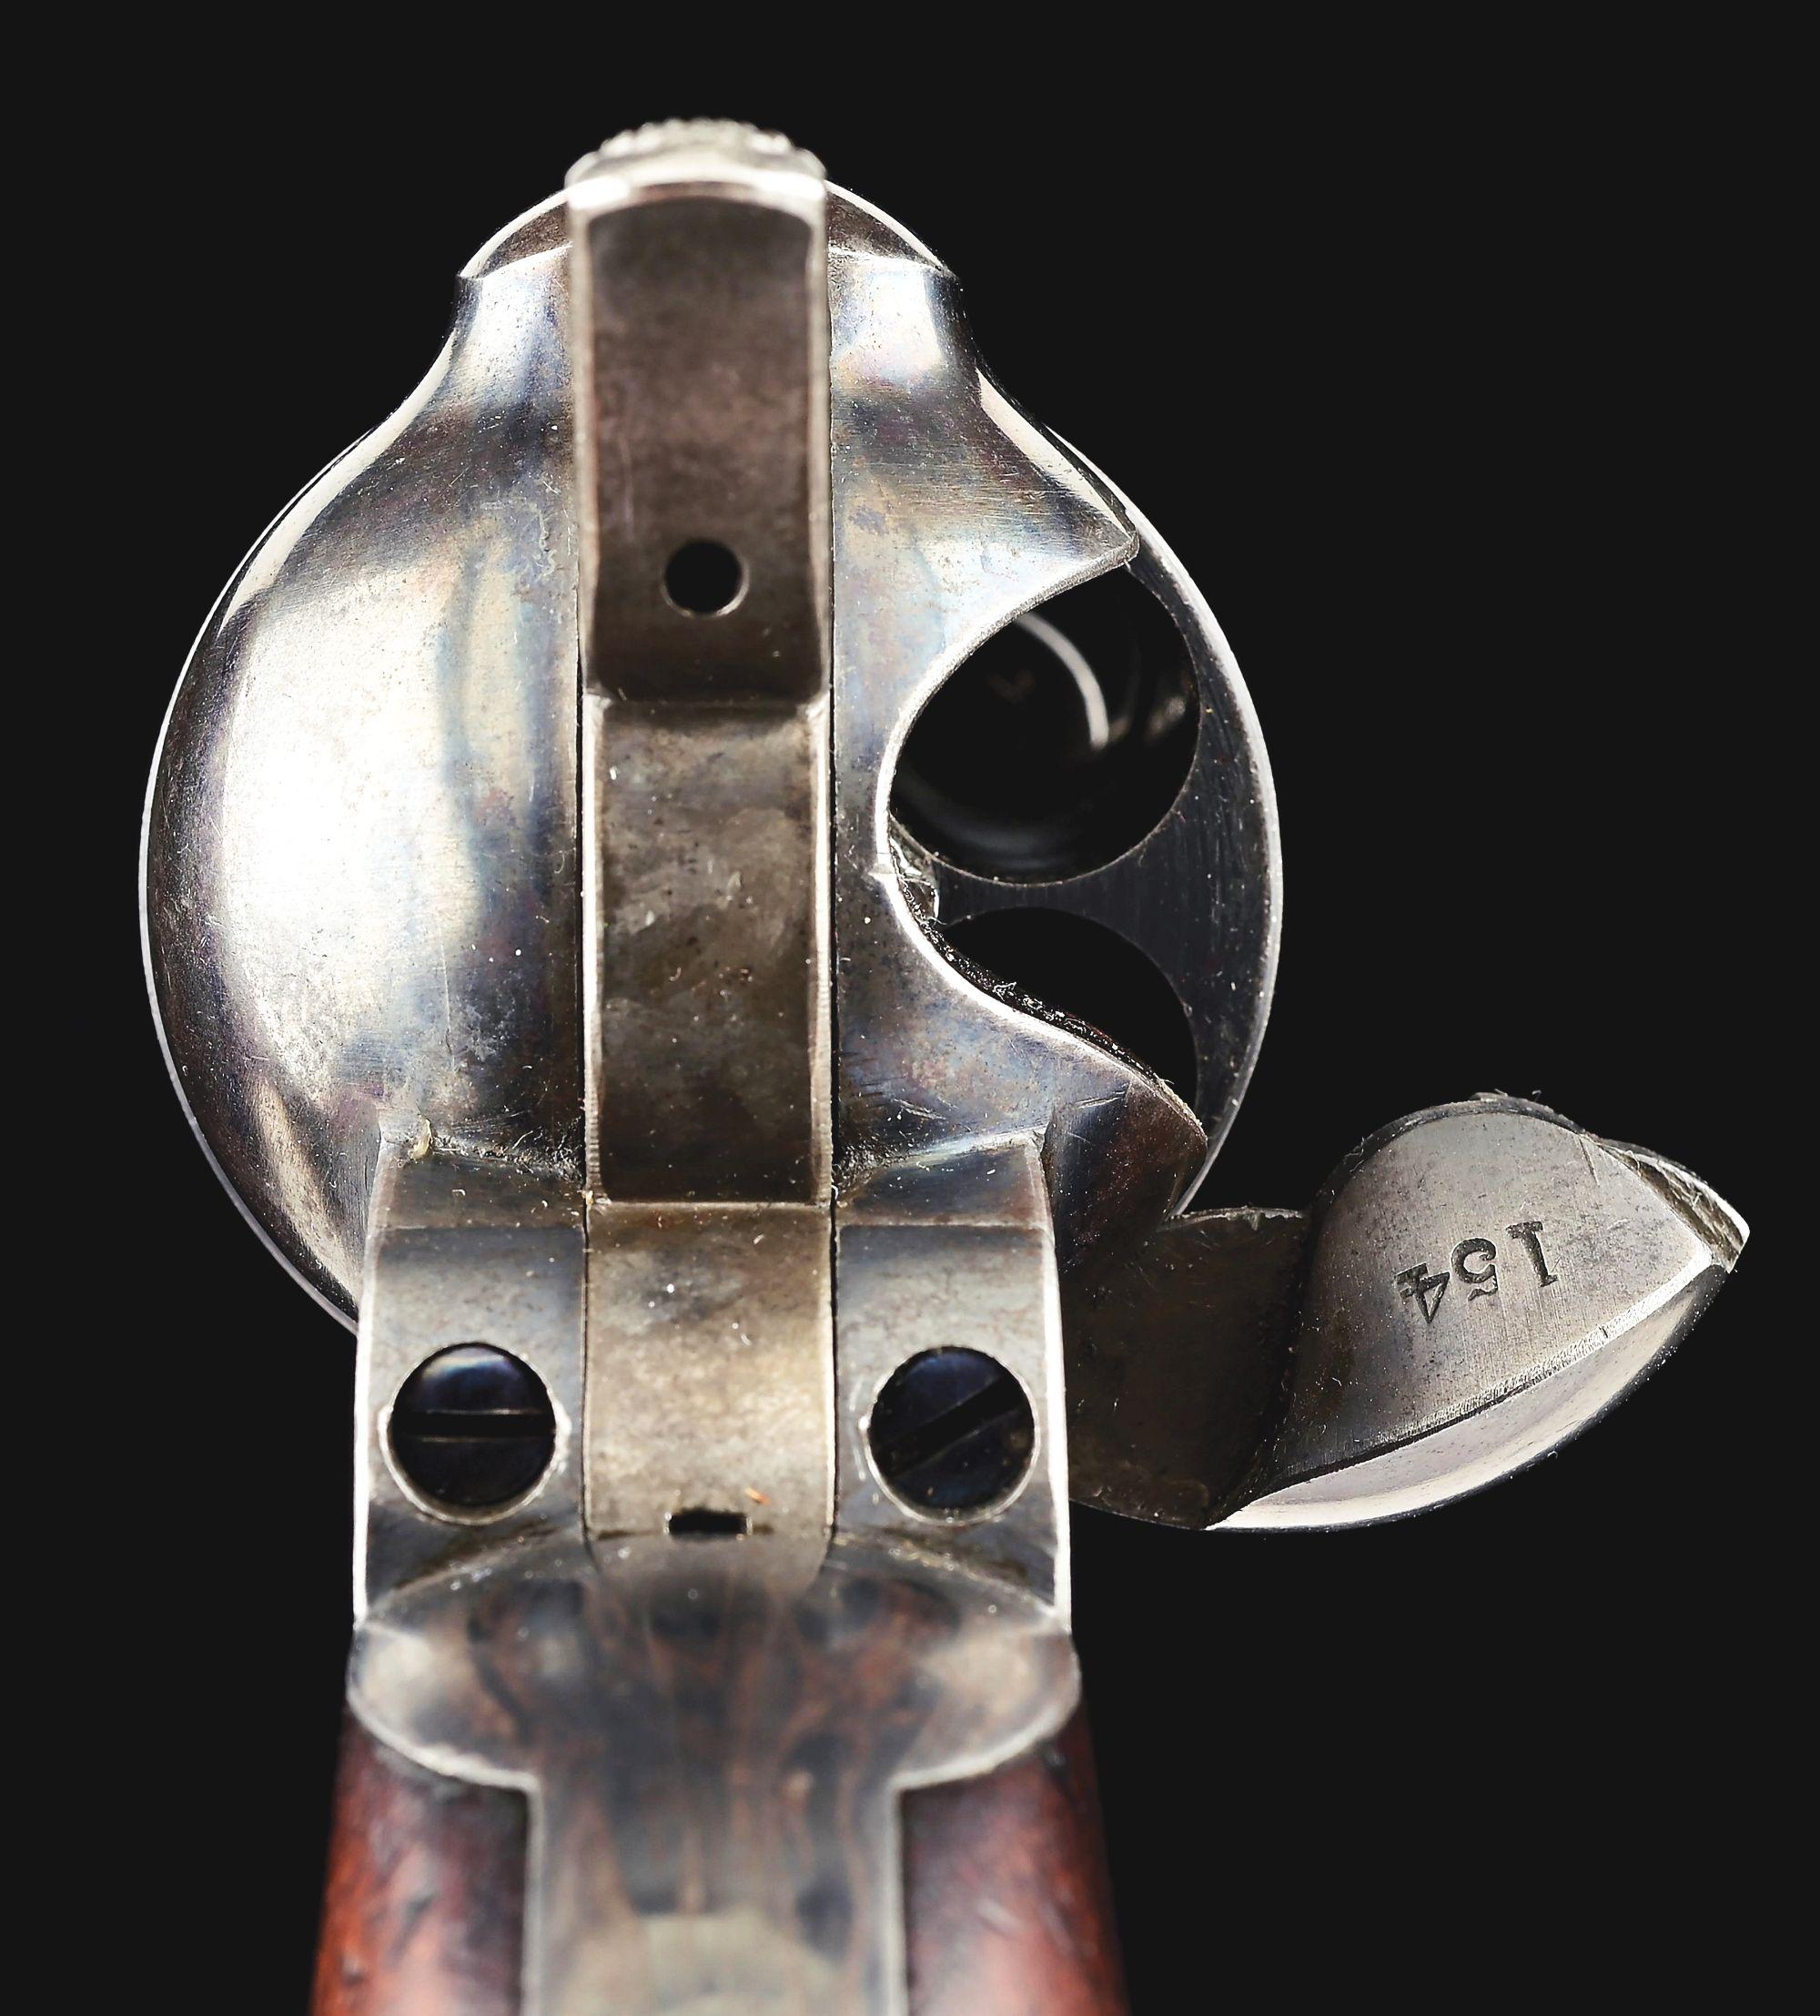 (A) NETTLETON INSPECTED COLT CAVALRY SINGLE ACTION ARMY REVOLVER.